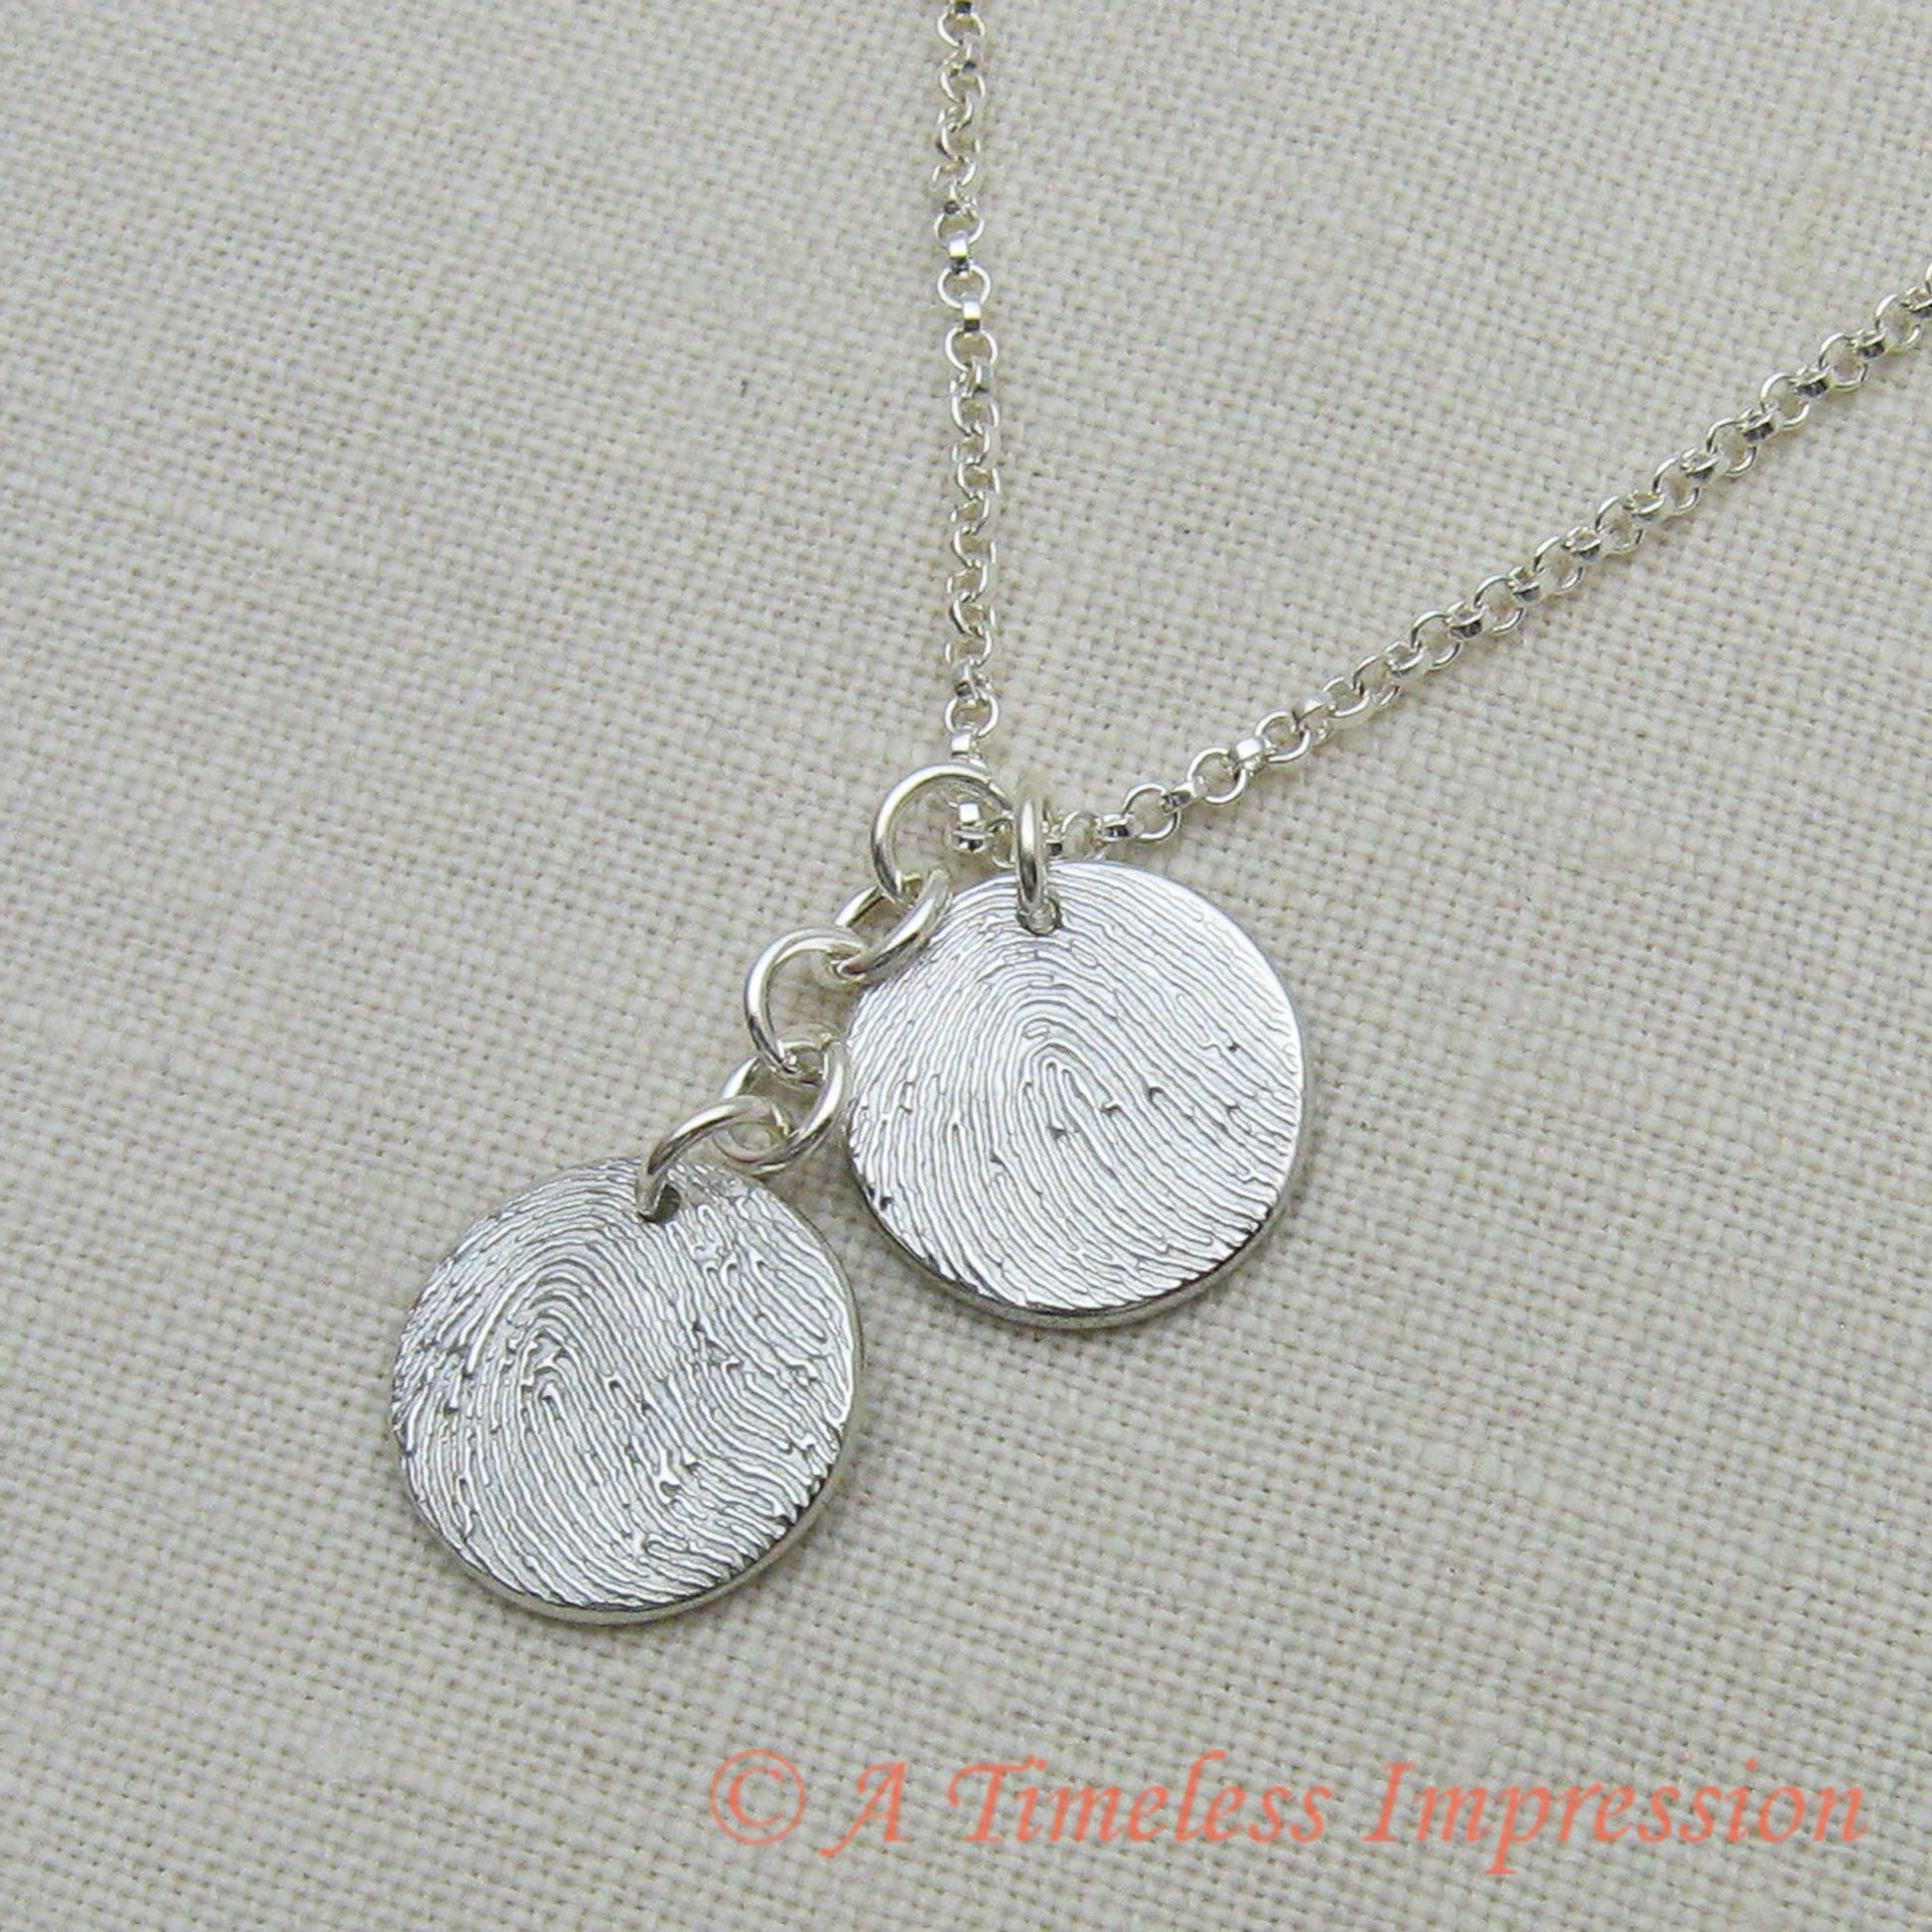 Circle Fingerprint Charm Necklace with two 5/8" circle charms